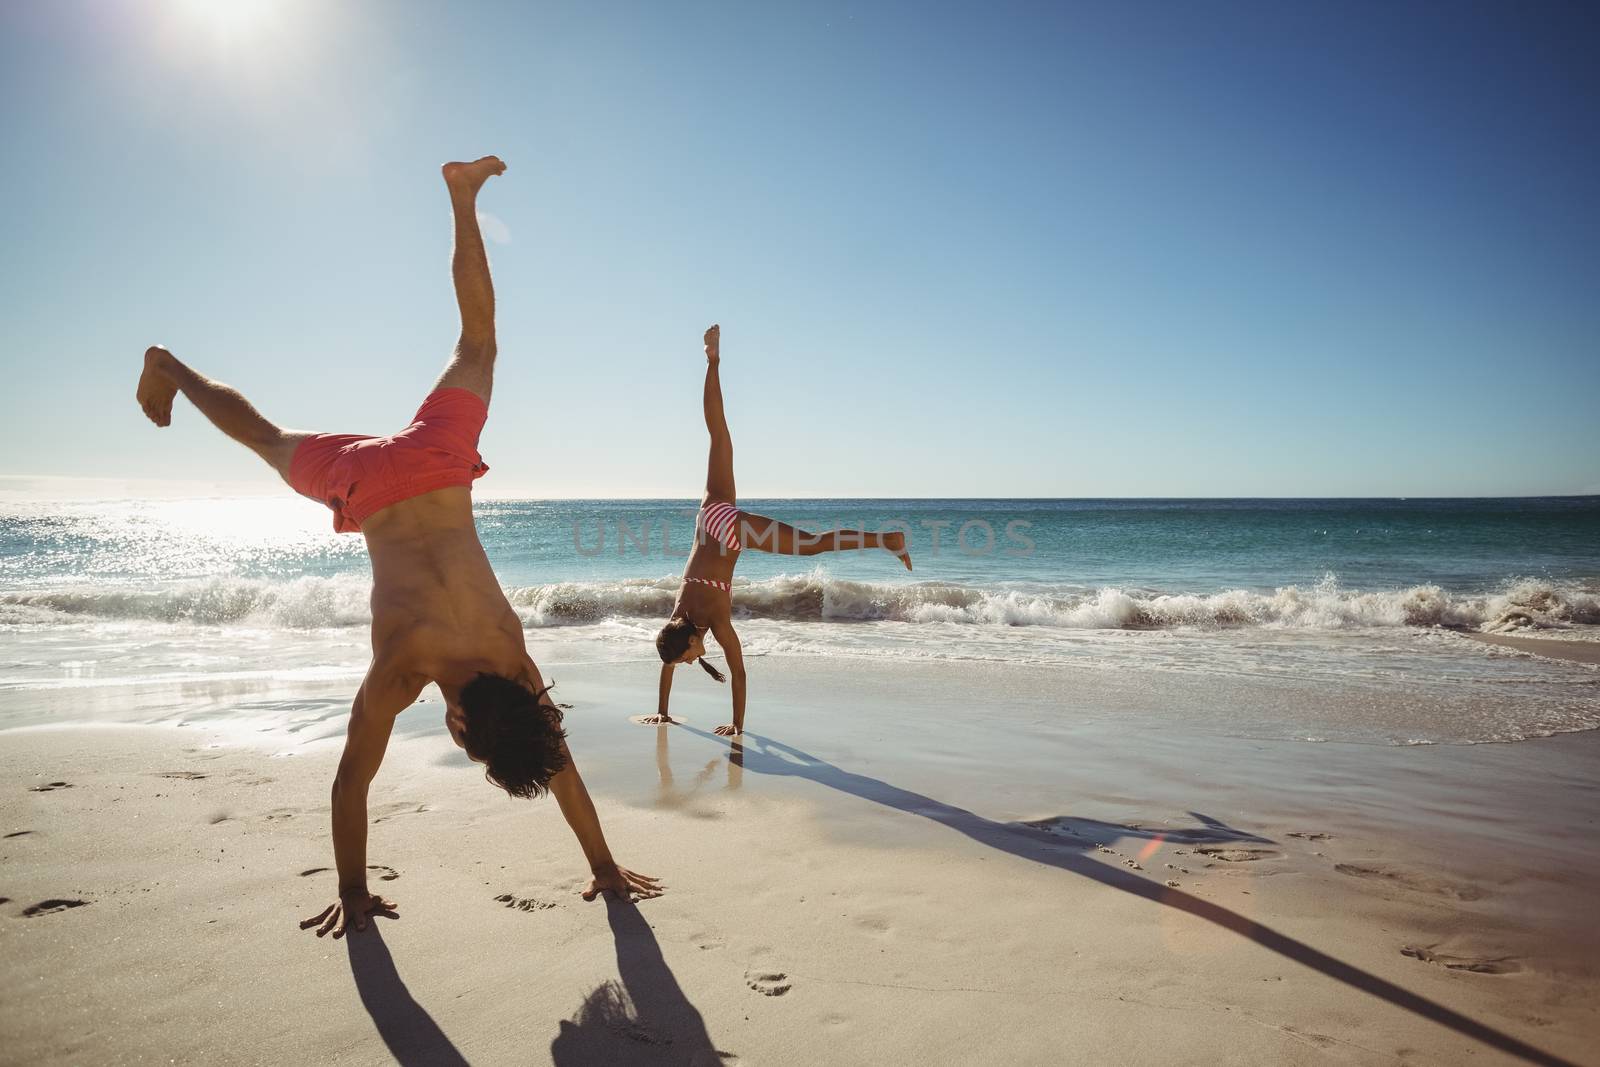 Couple performing somersault on beach in summer